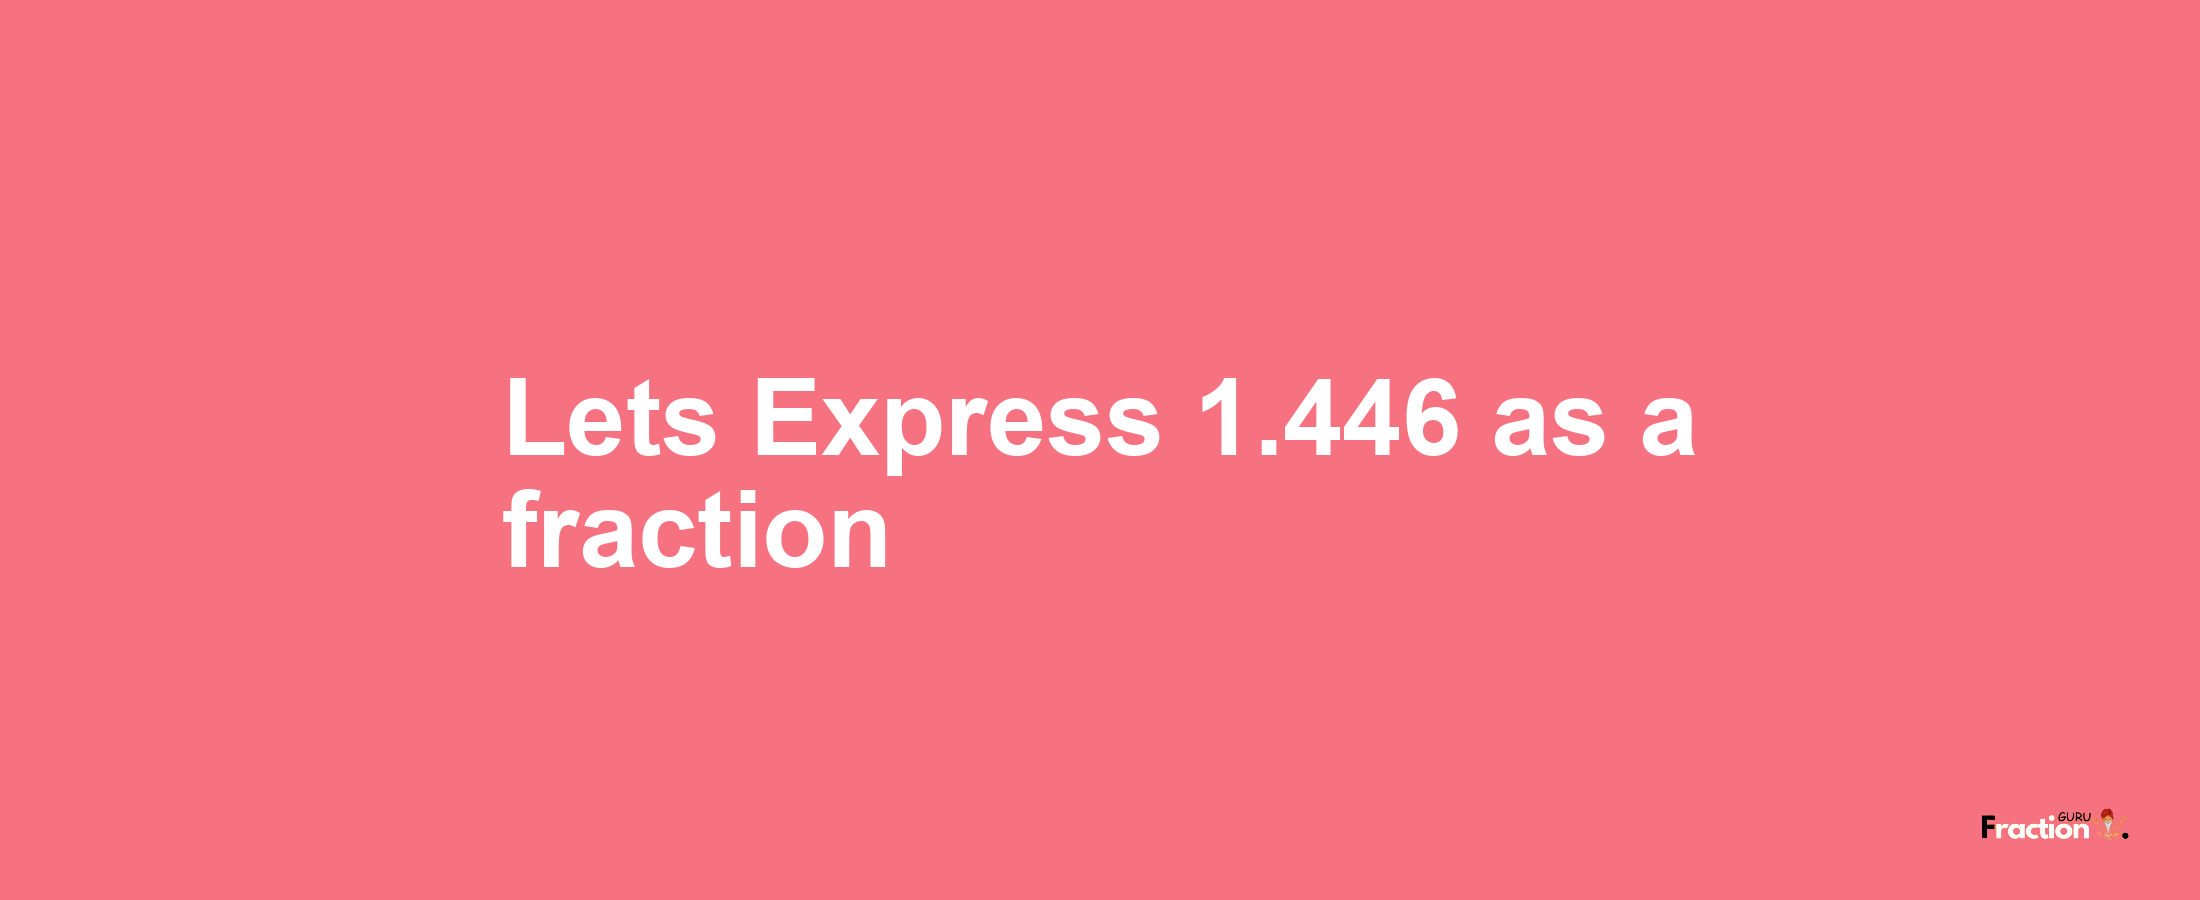 Lets Express 1.446 as afraction